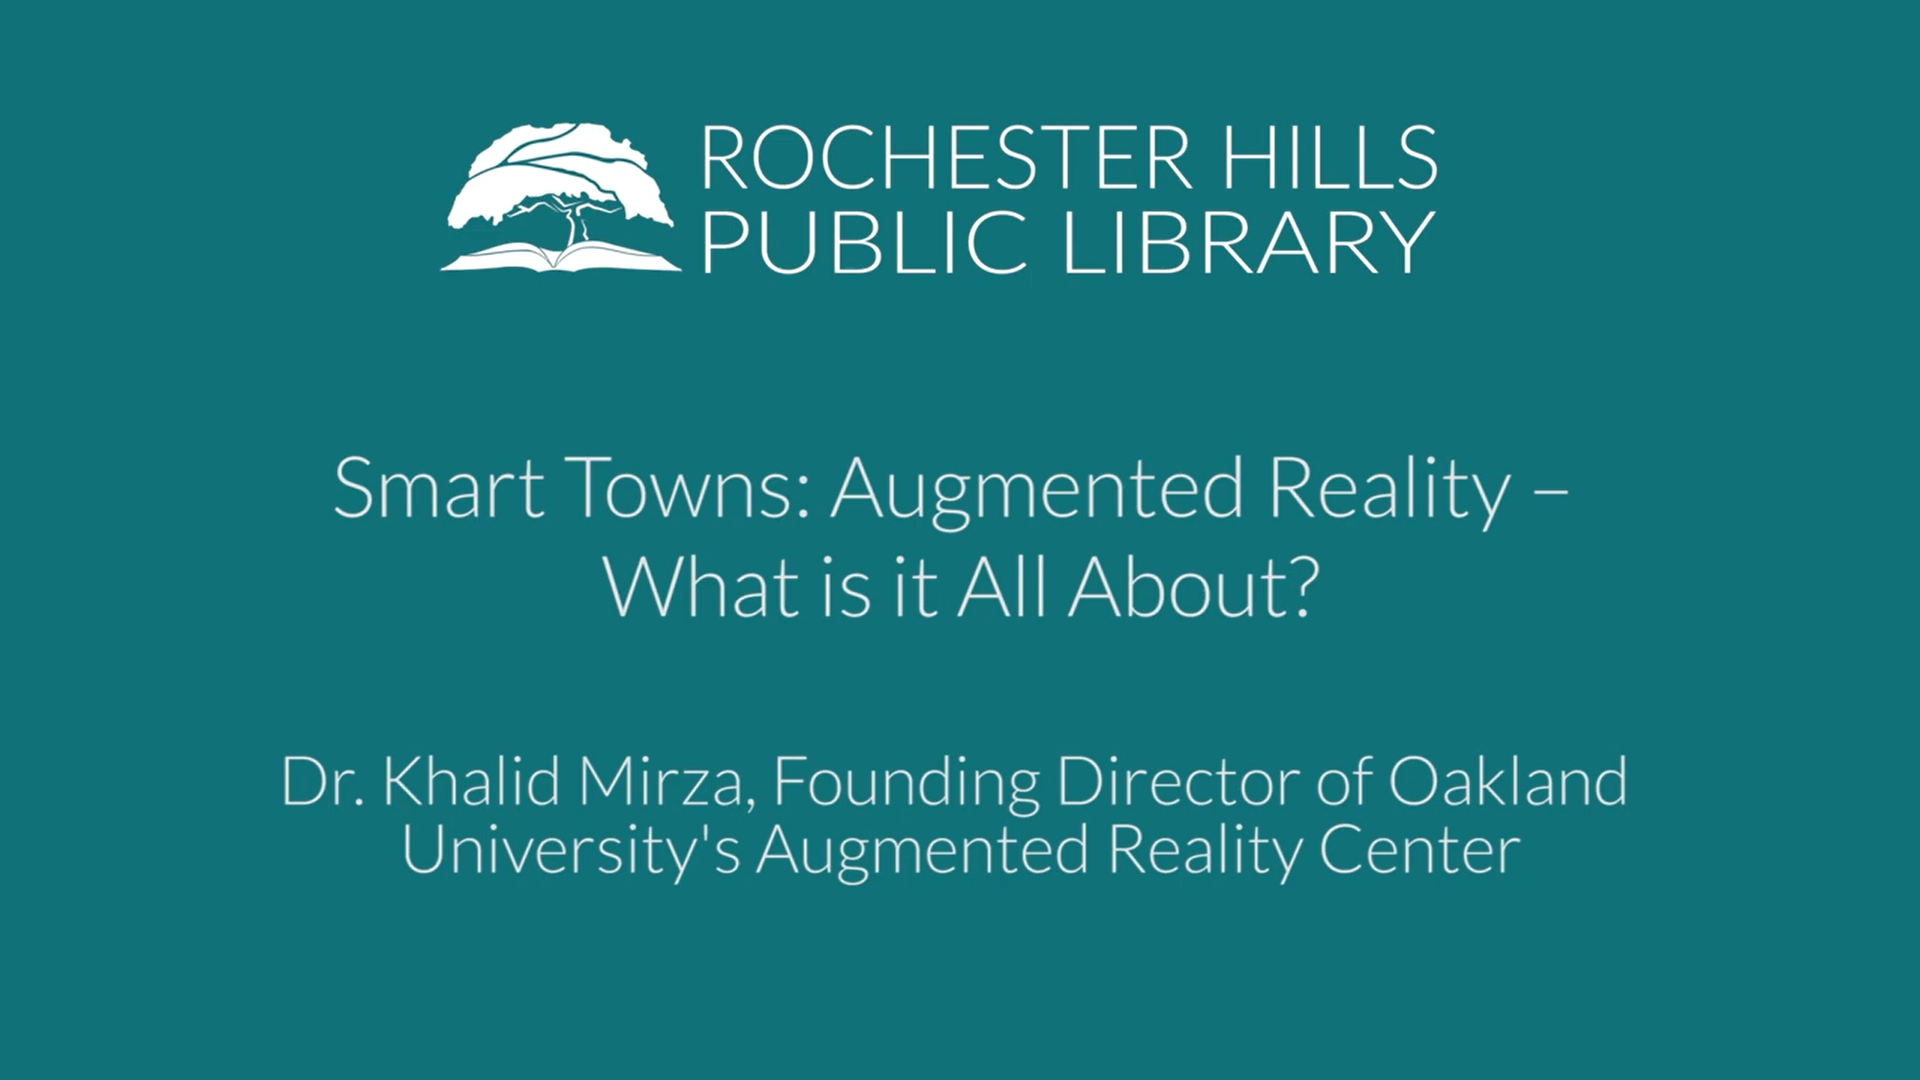 Smart Towns: Augmented Reality – What is it All About?